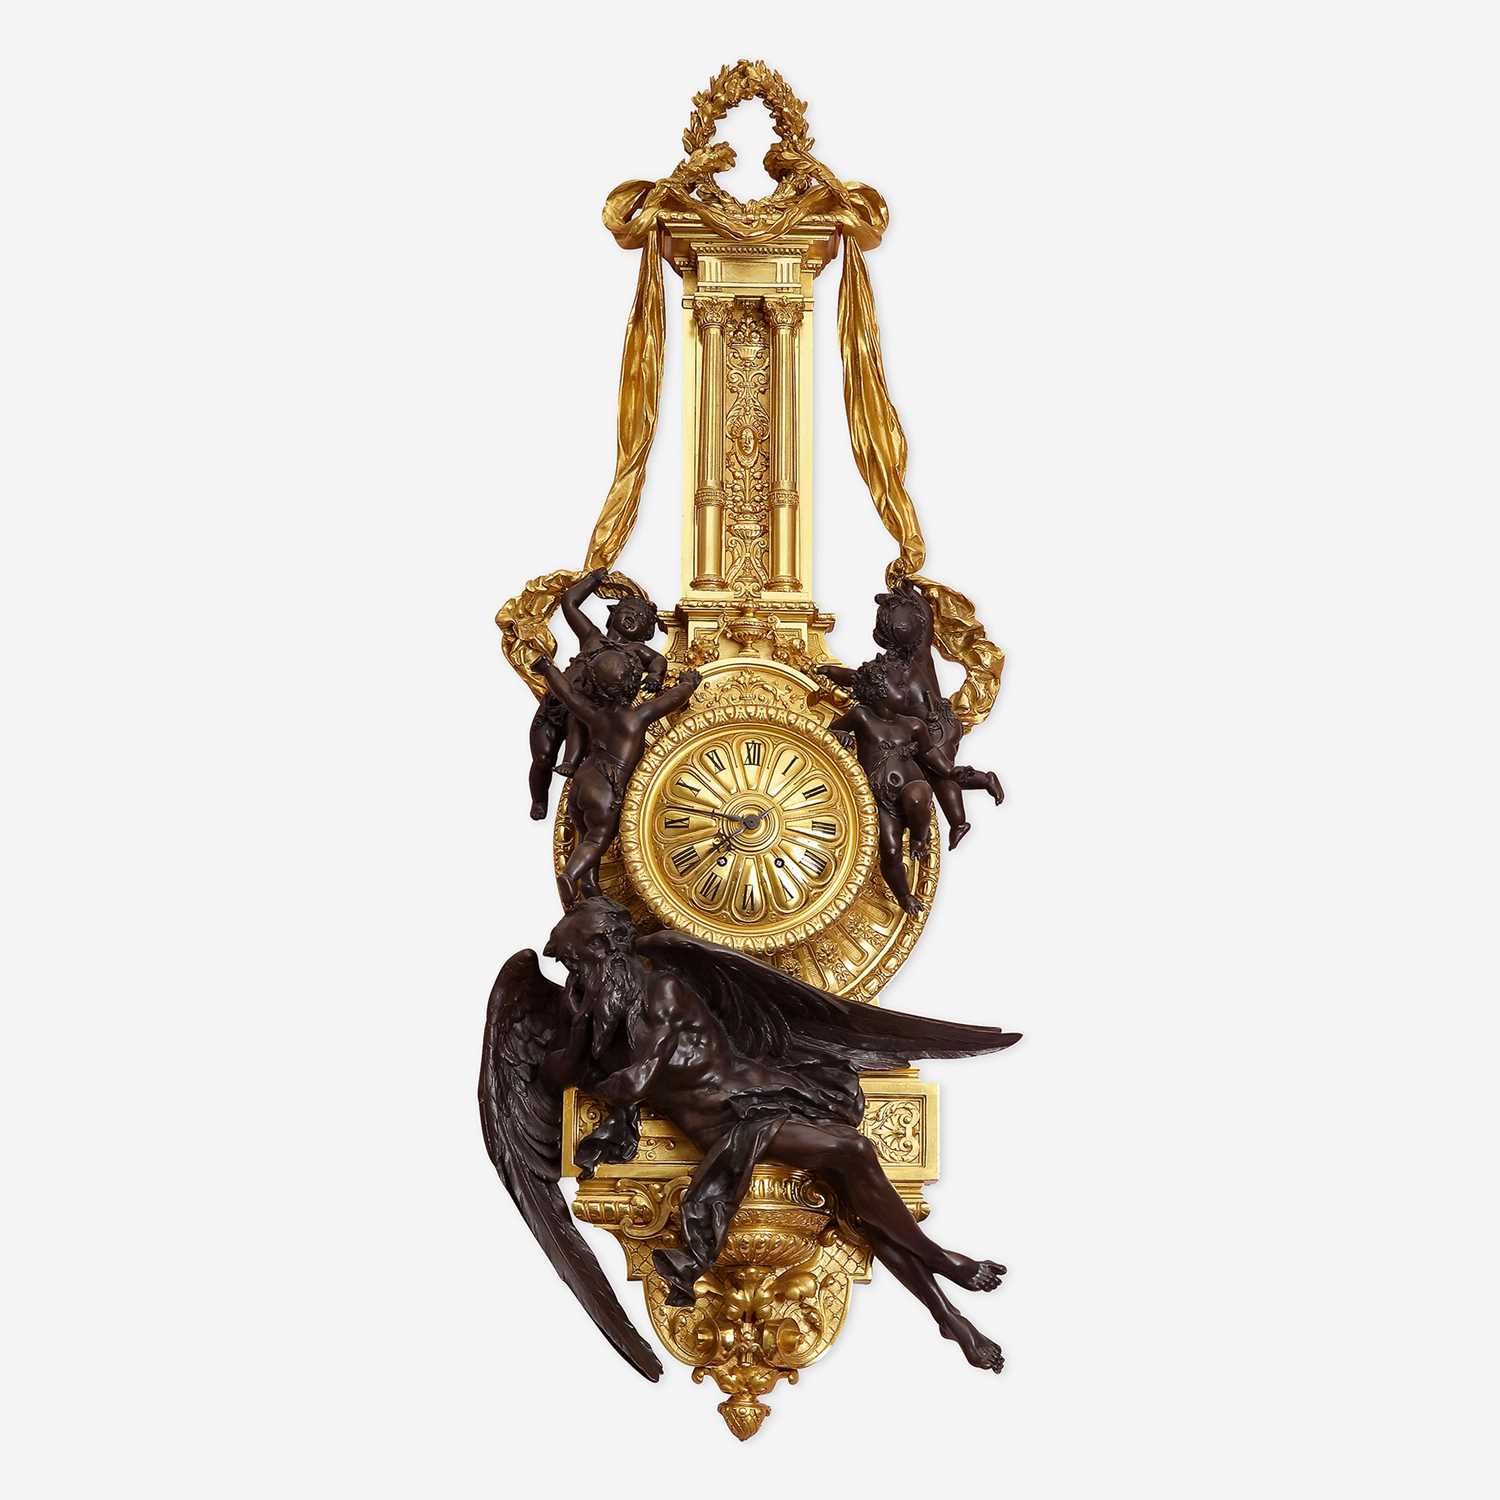 Lot 8 - A Fine and Large Louis XVI Style Gilt and Patinated Bronze Cartel Clock